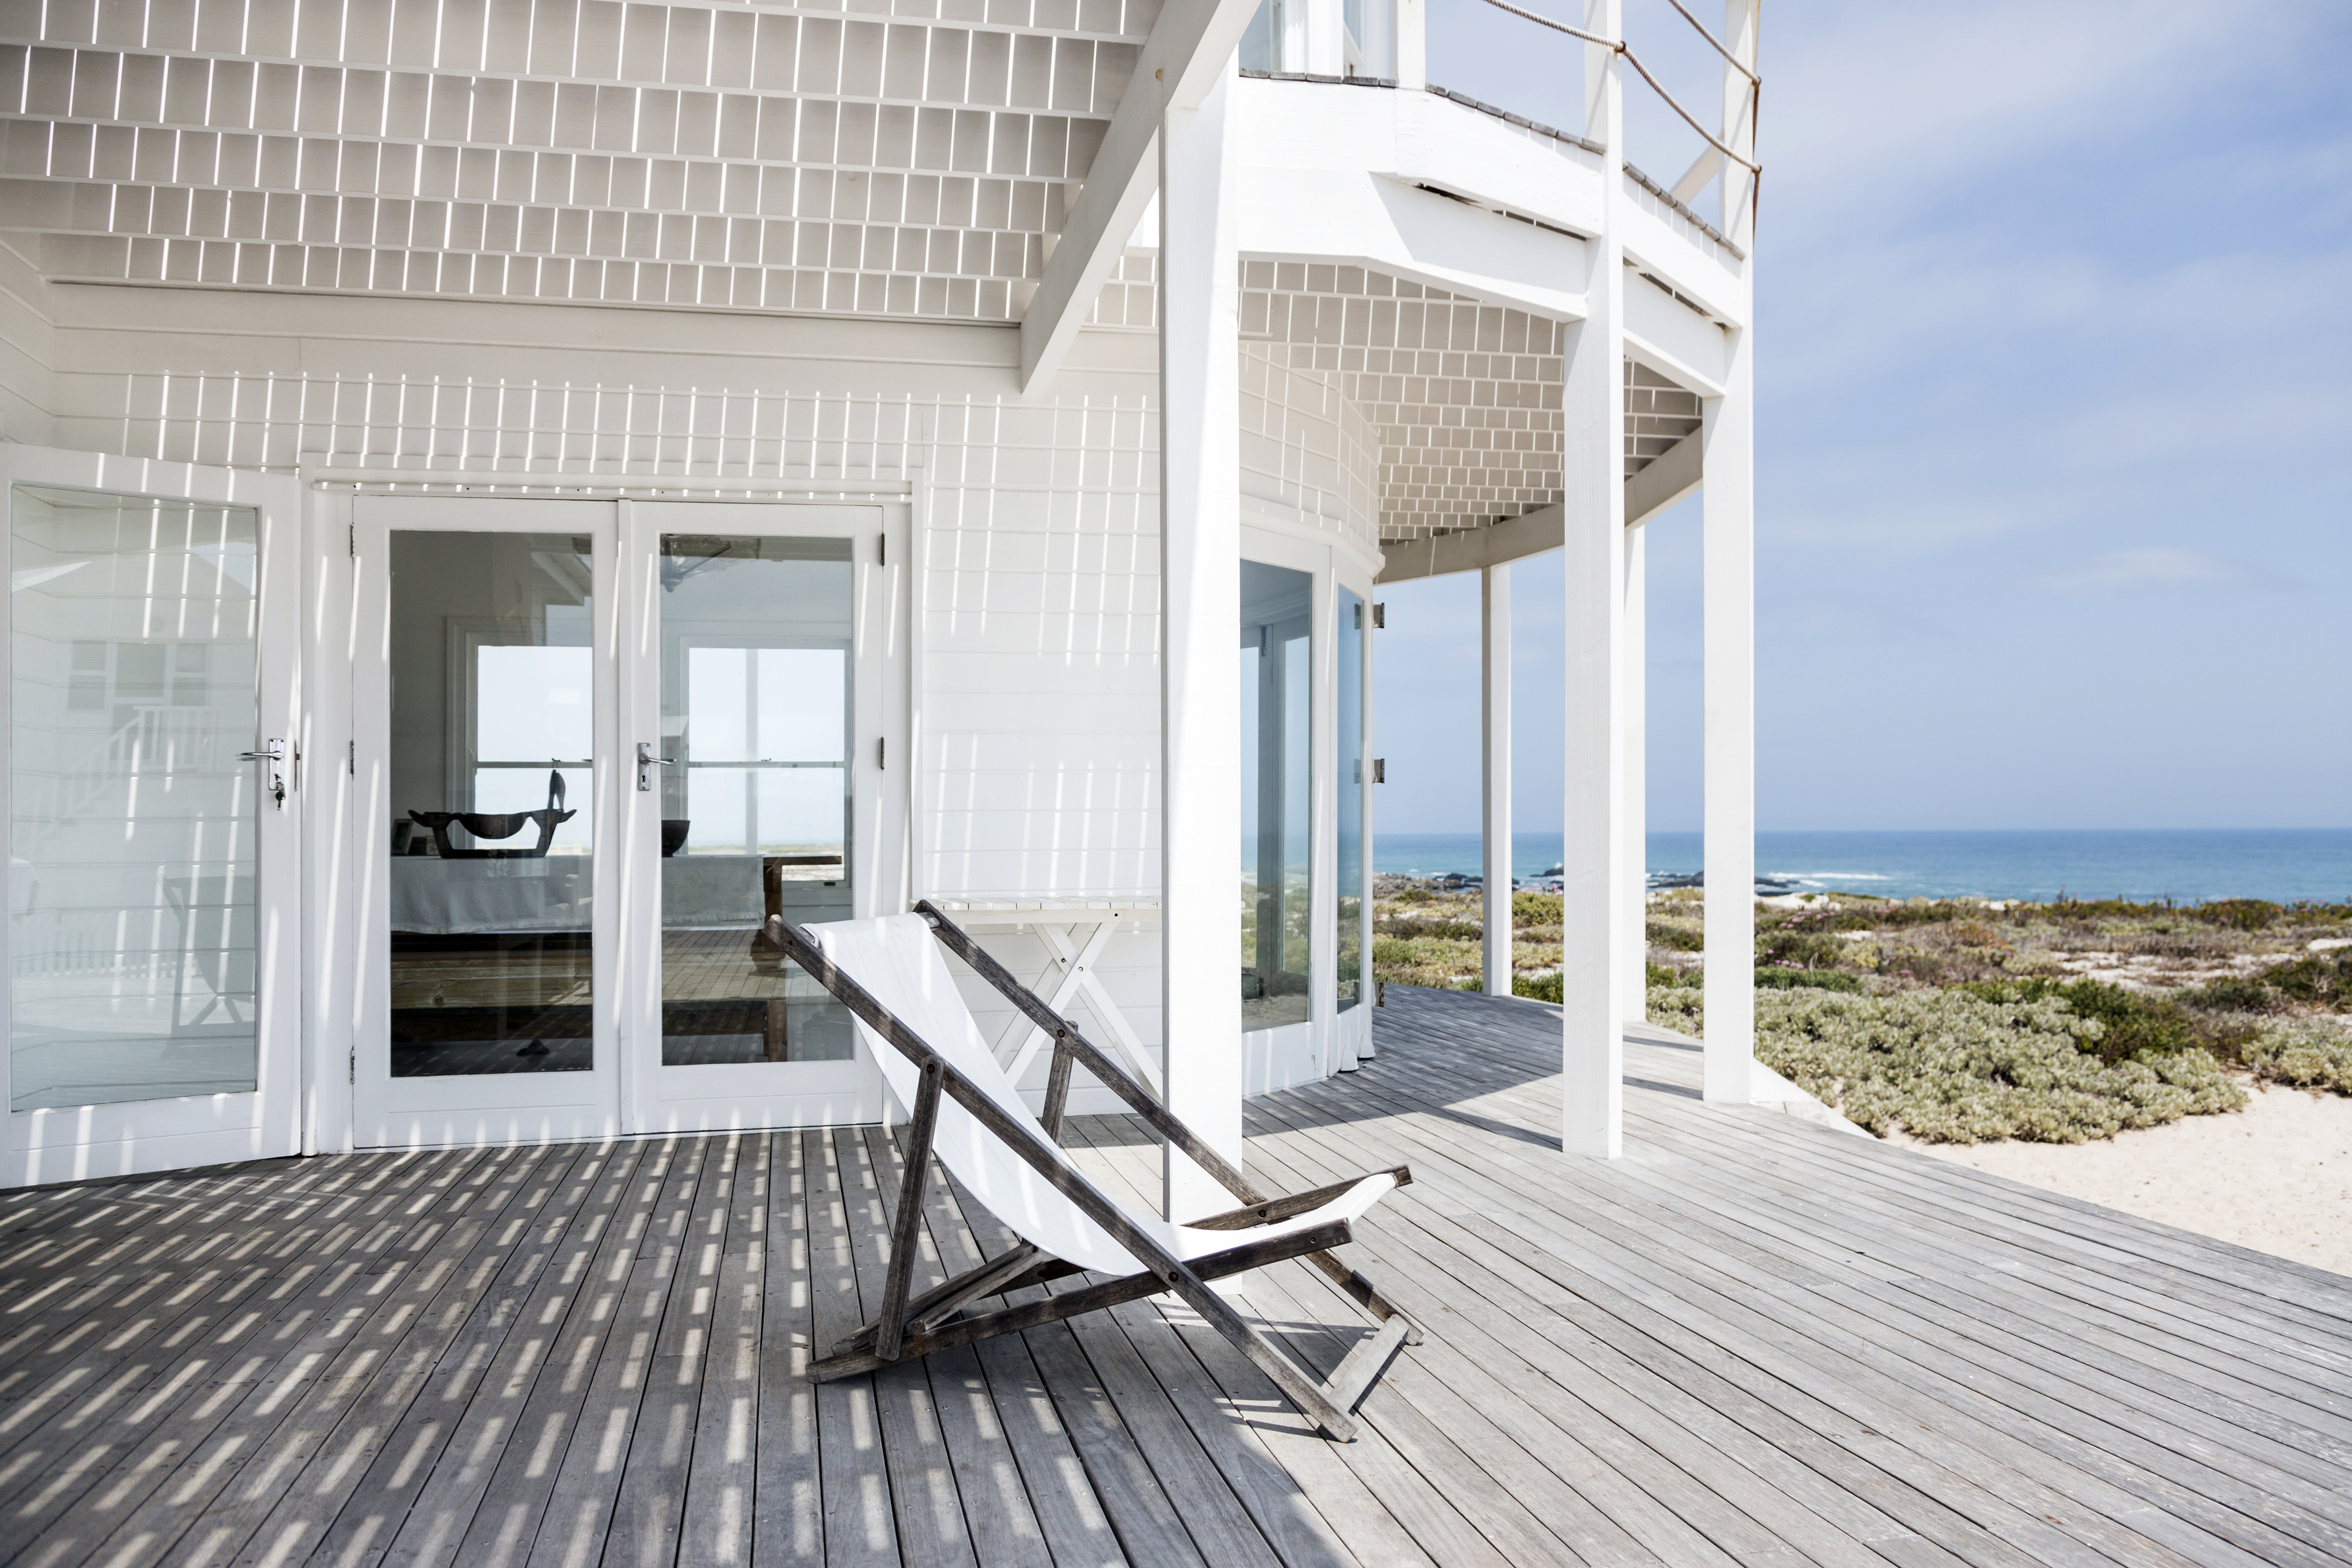 7 Tips For Buying a Vacation Home